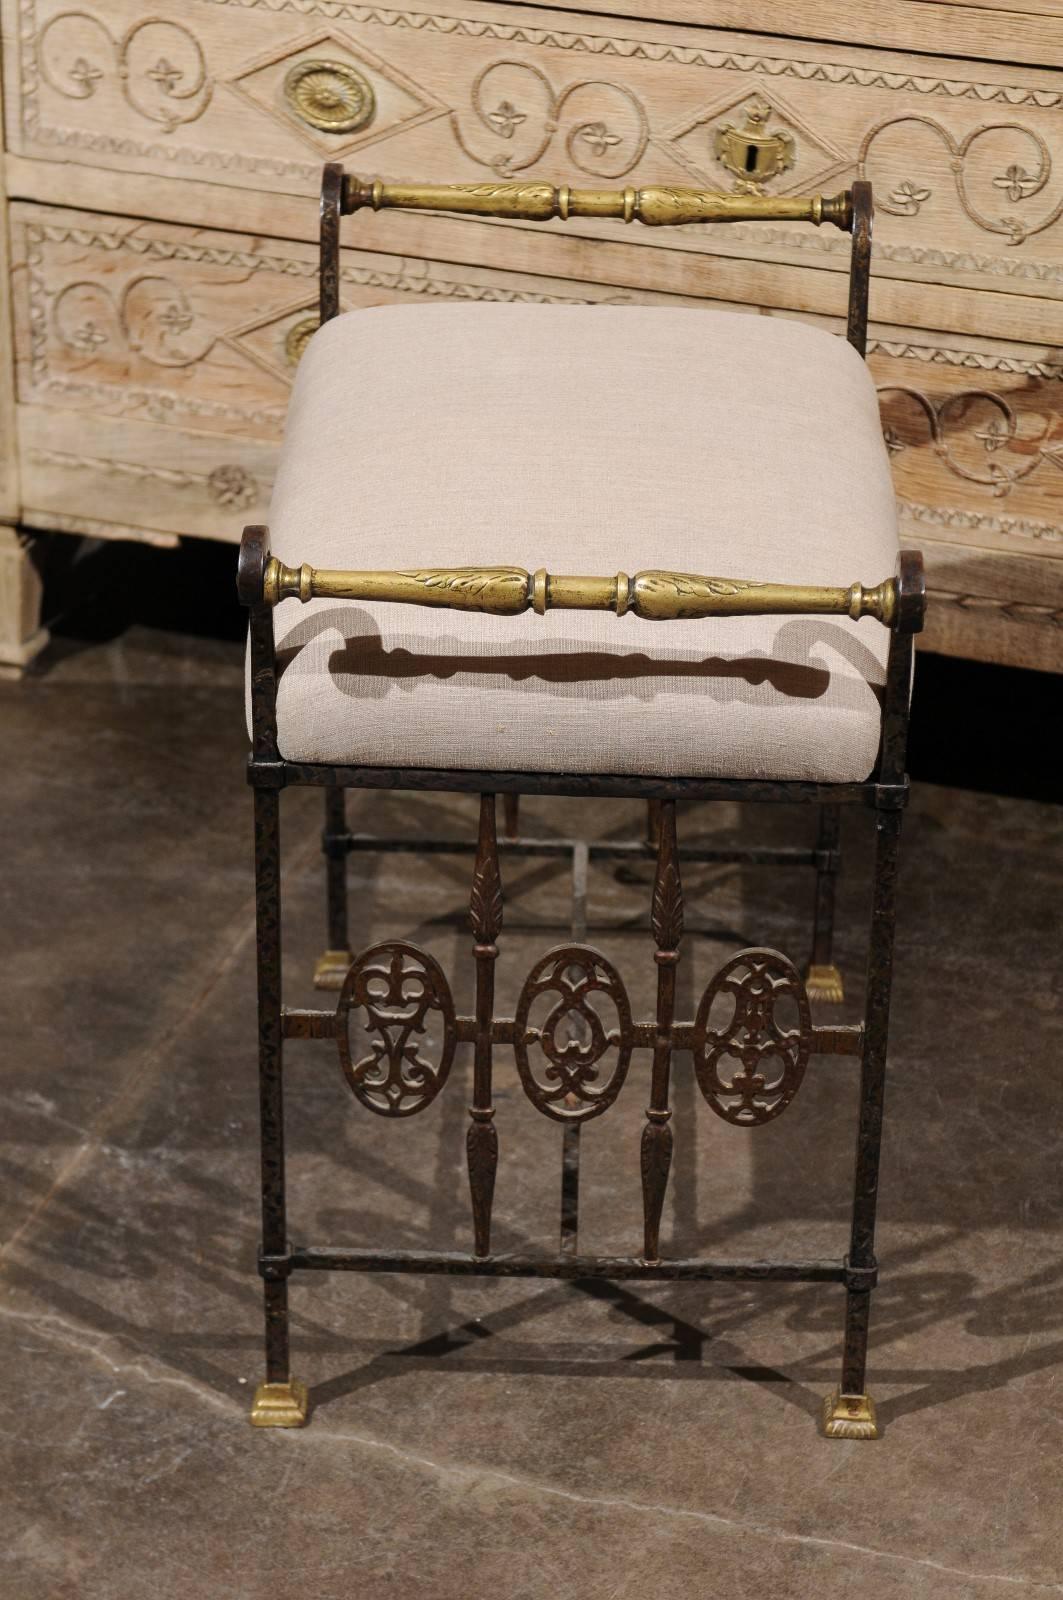 20th Century Italian 1920s Wrought-Iron Upholstered Bench with Bronze Accents